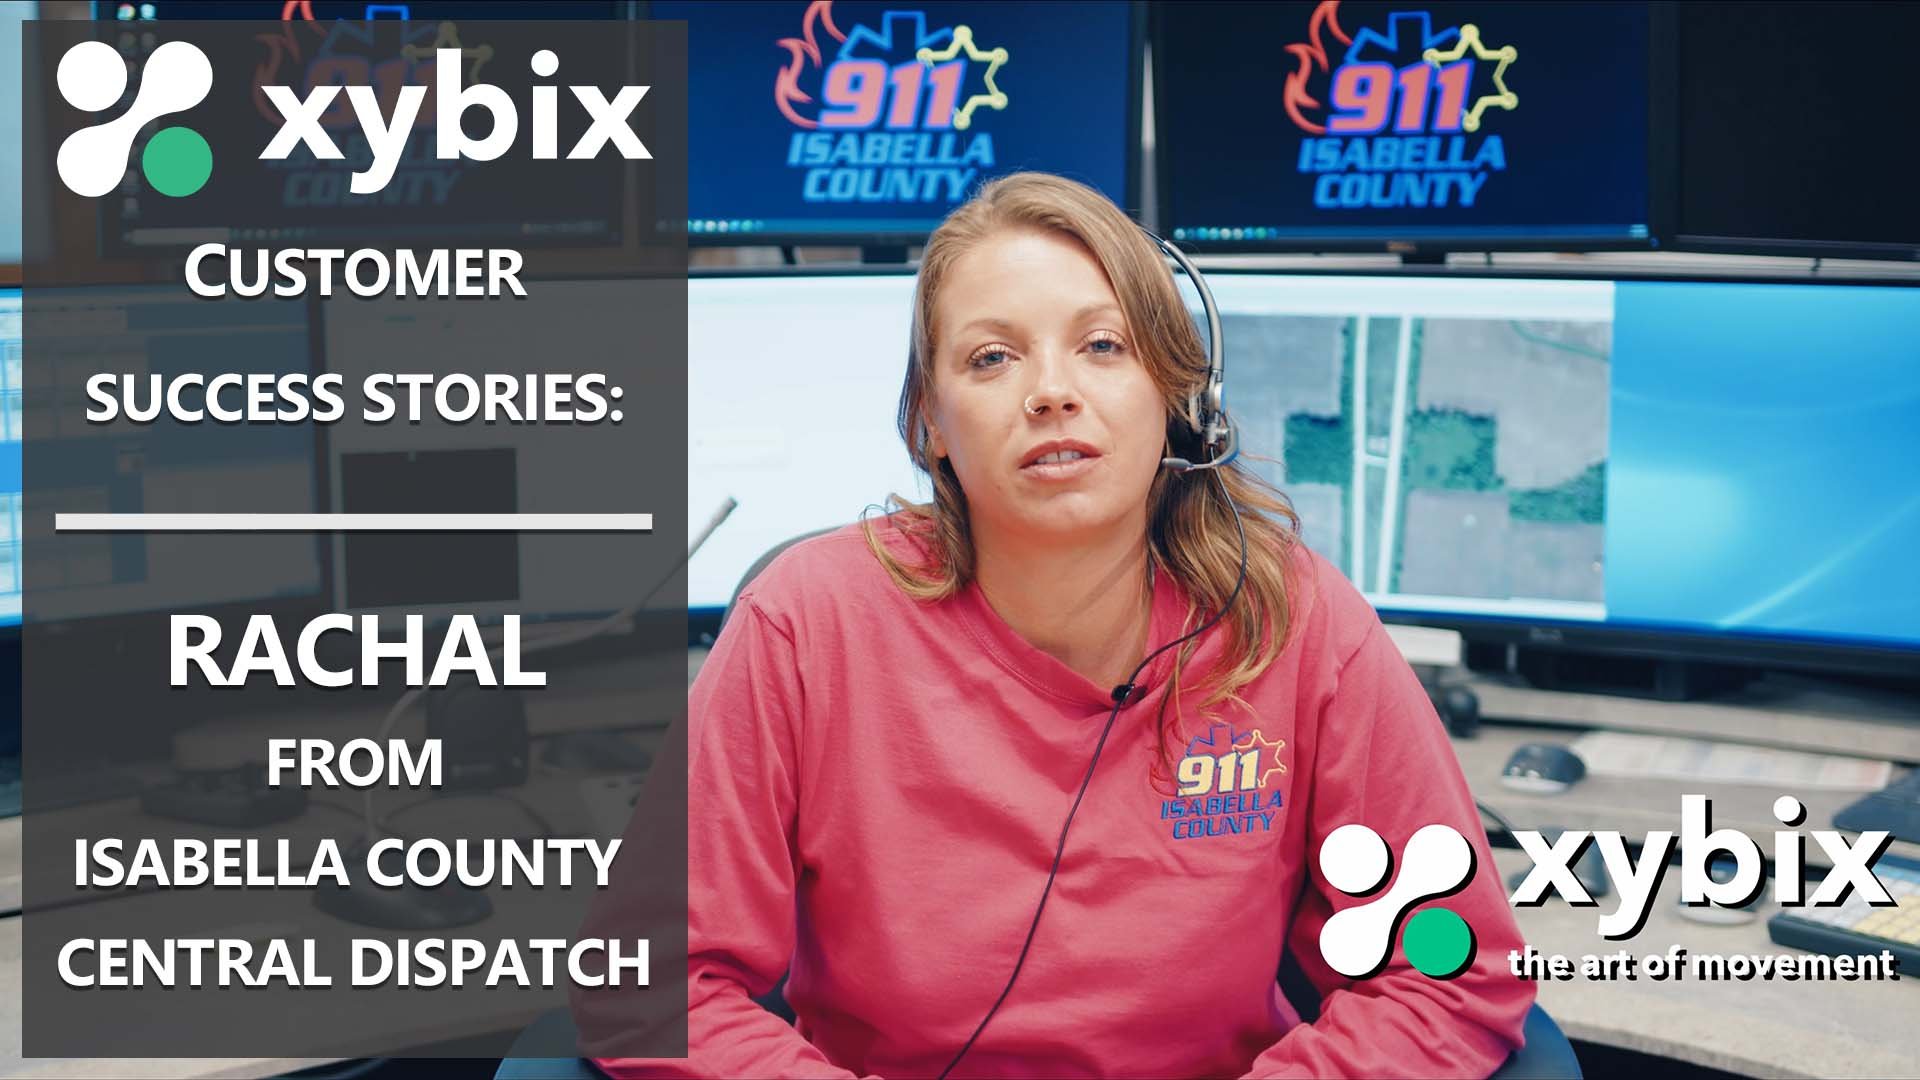 Xybix Testimonials - Rachal from Isabella County Central Dispatch in Michigan